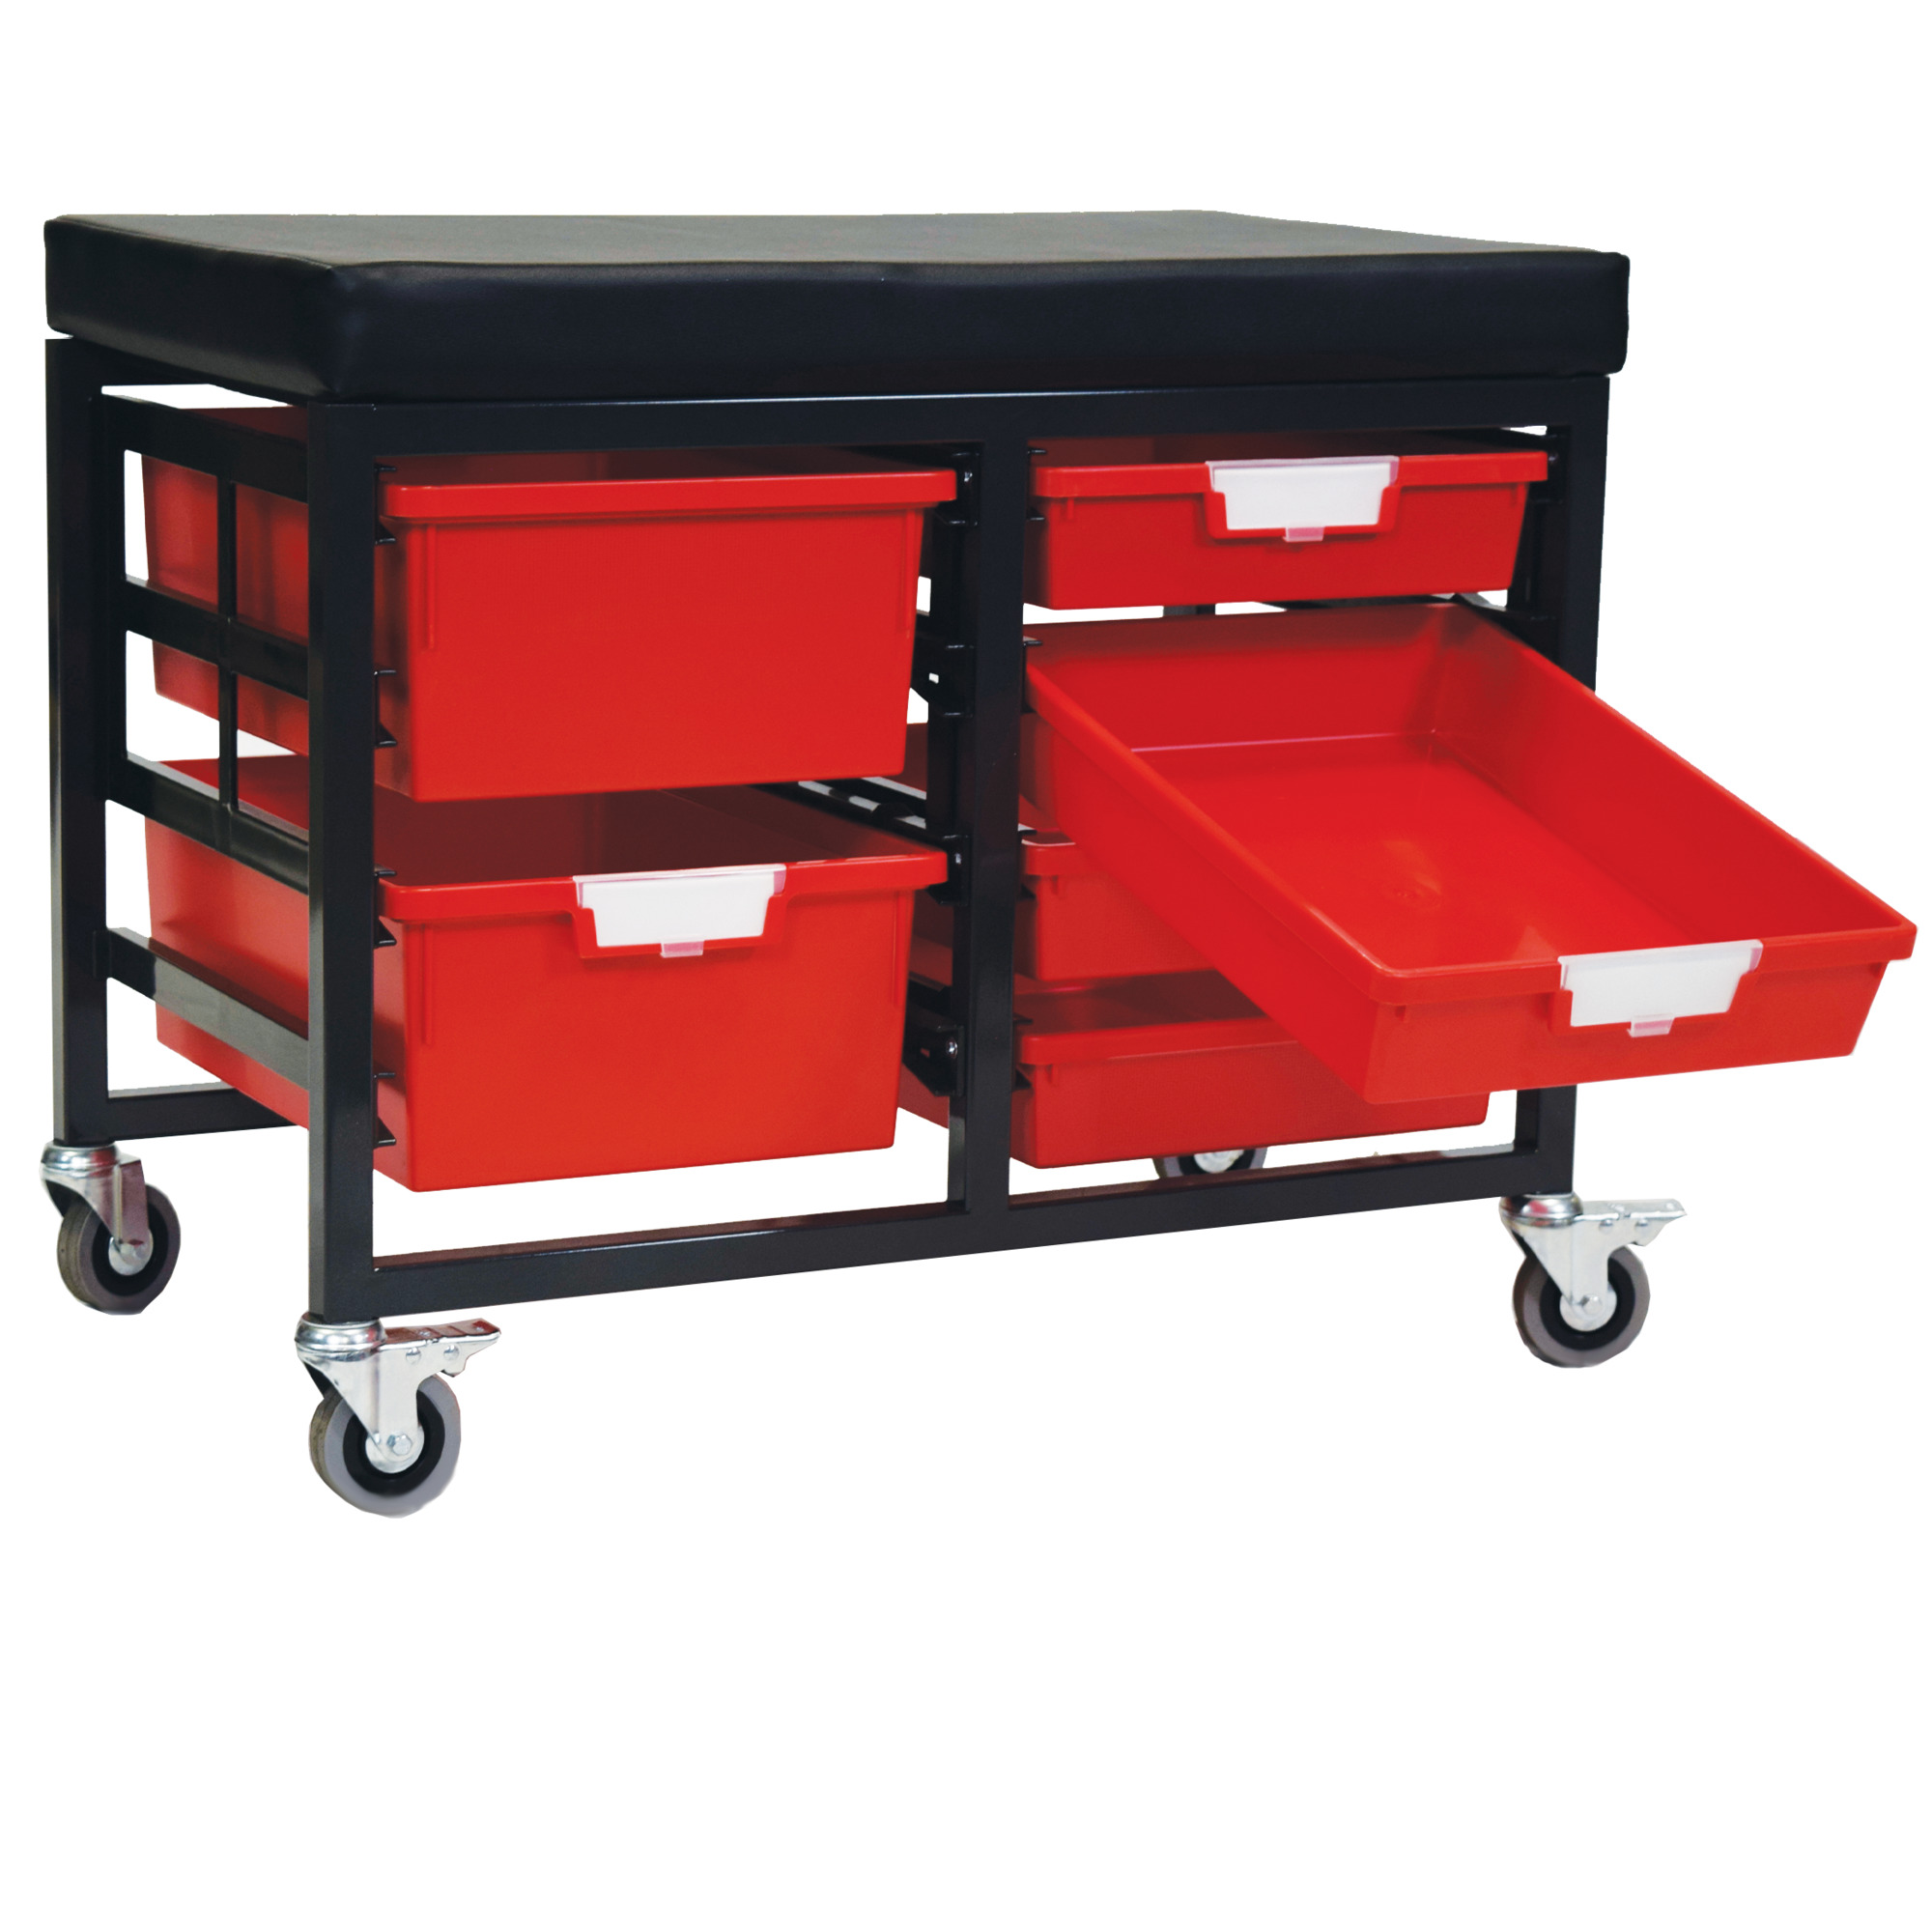 Certwood StorWerks, StorBenchSeat w/ 6 Storsystem Trays and Bins-Red, Included (qty.) 6, Material Plastic, Height 12 in, Model CE2109DGGC-4S2DPR